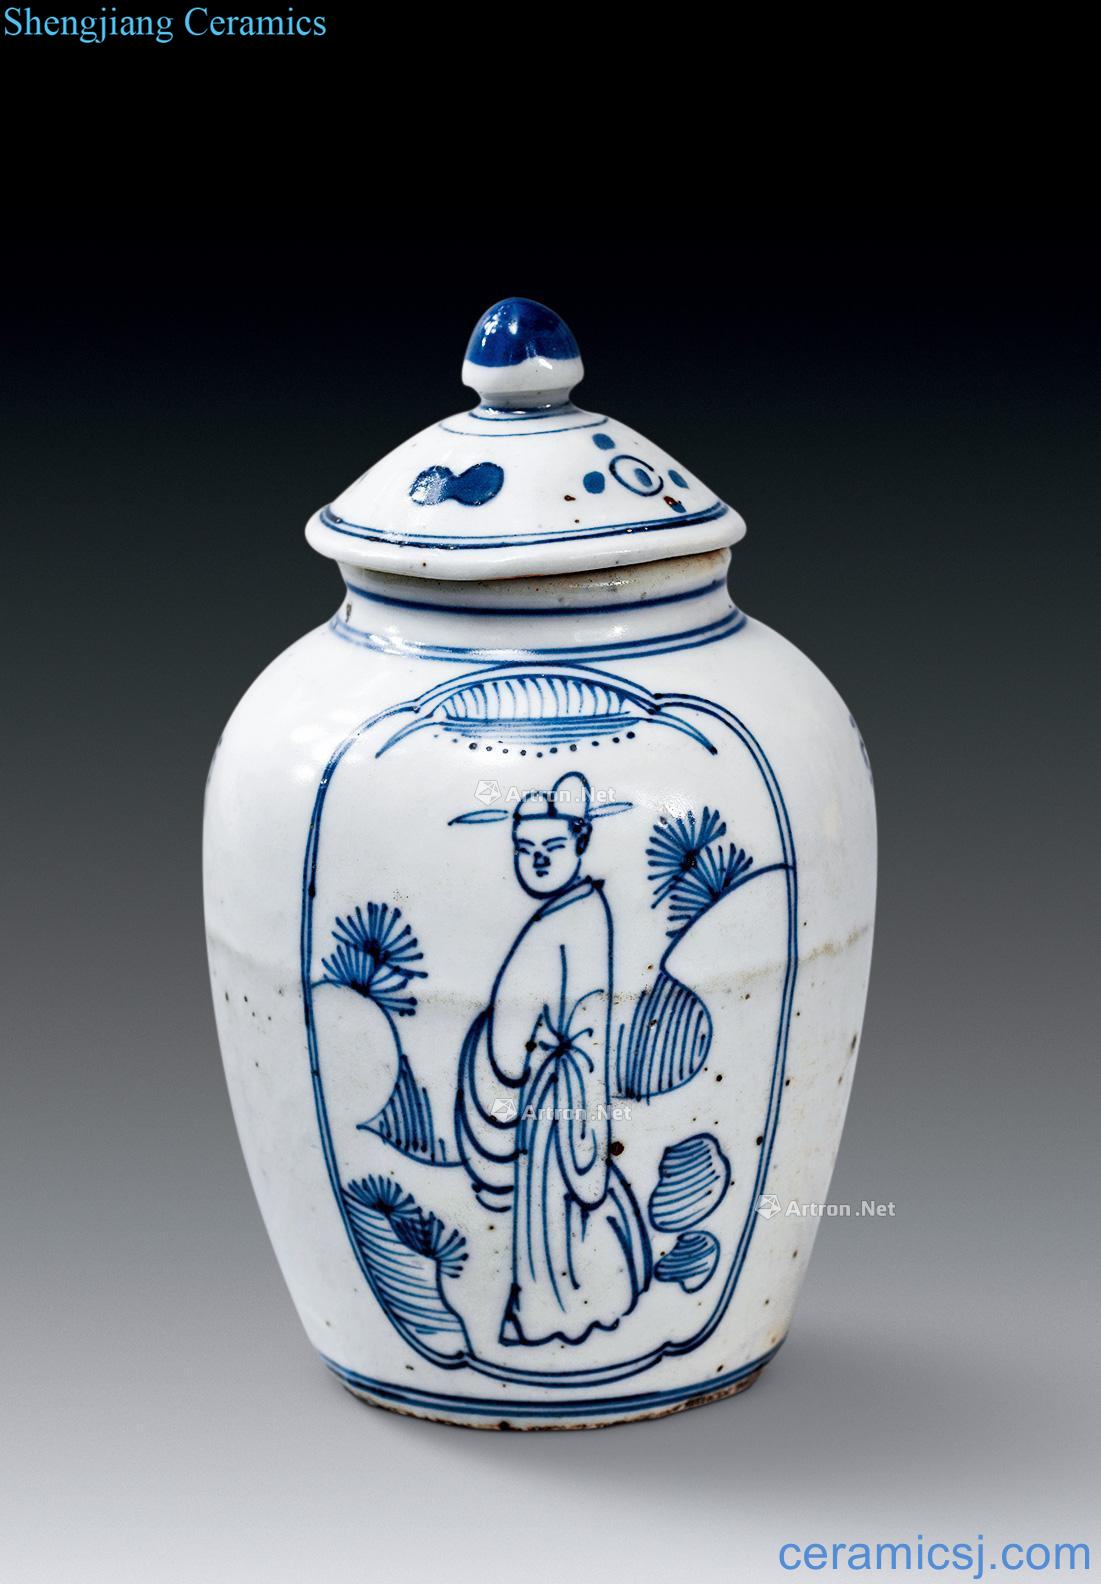 In the Ming dynasty Blue and white figure cross tougue cans